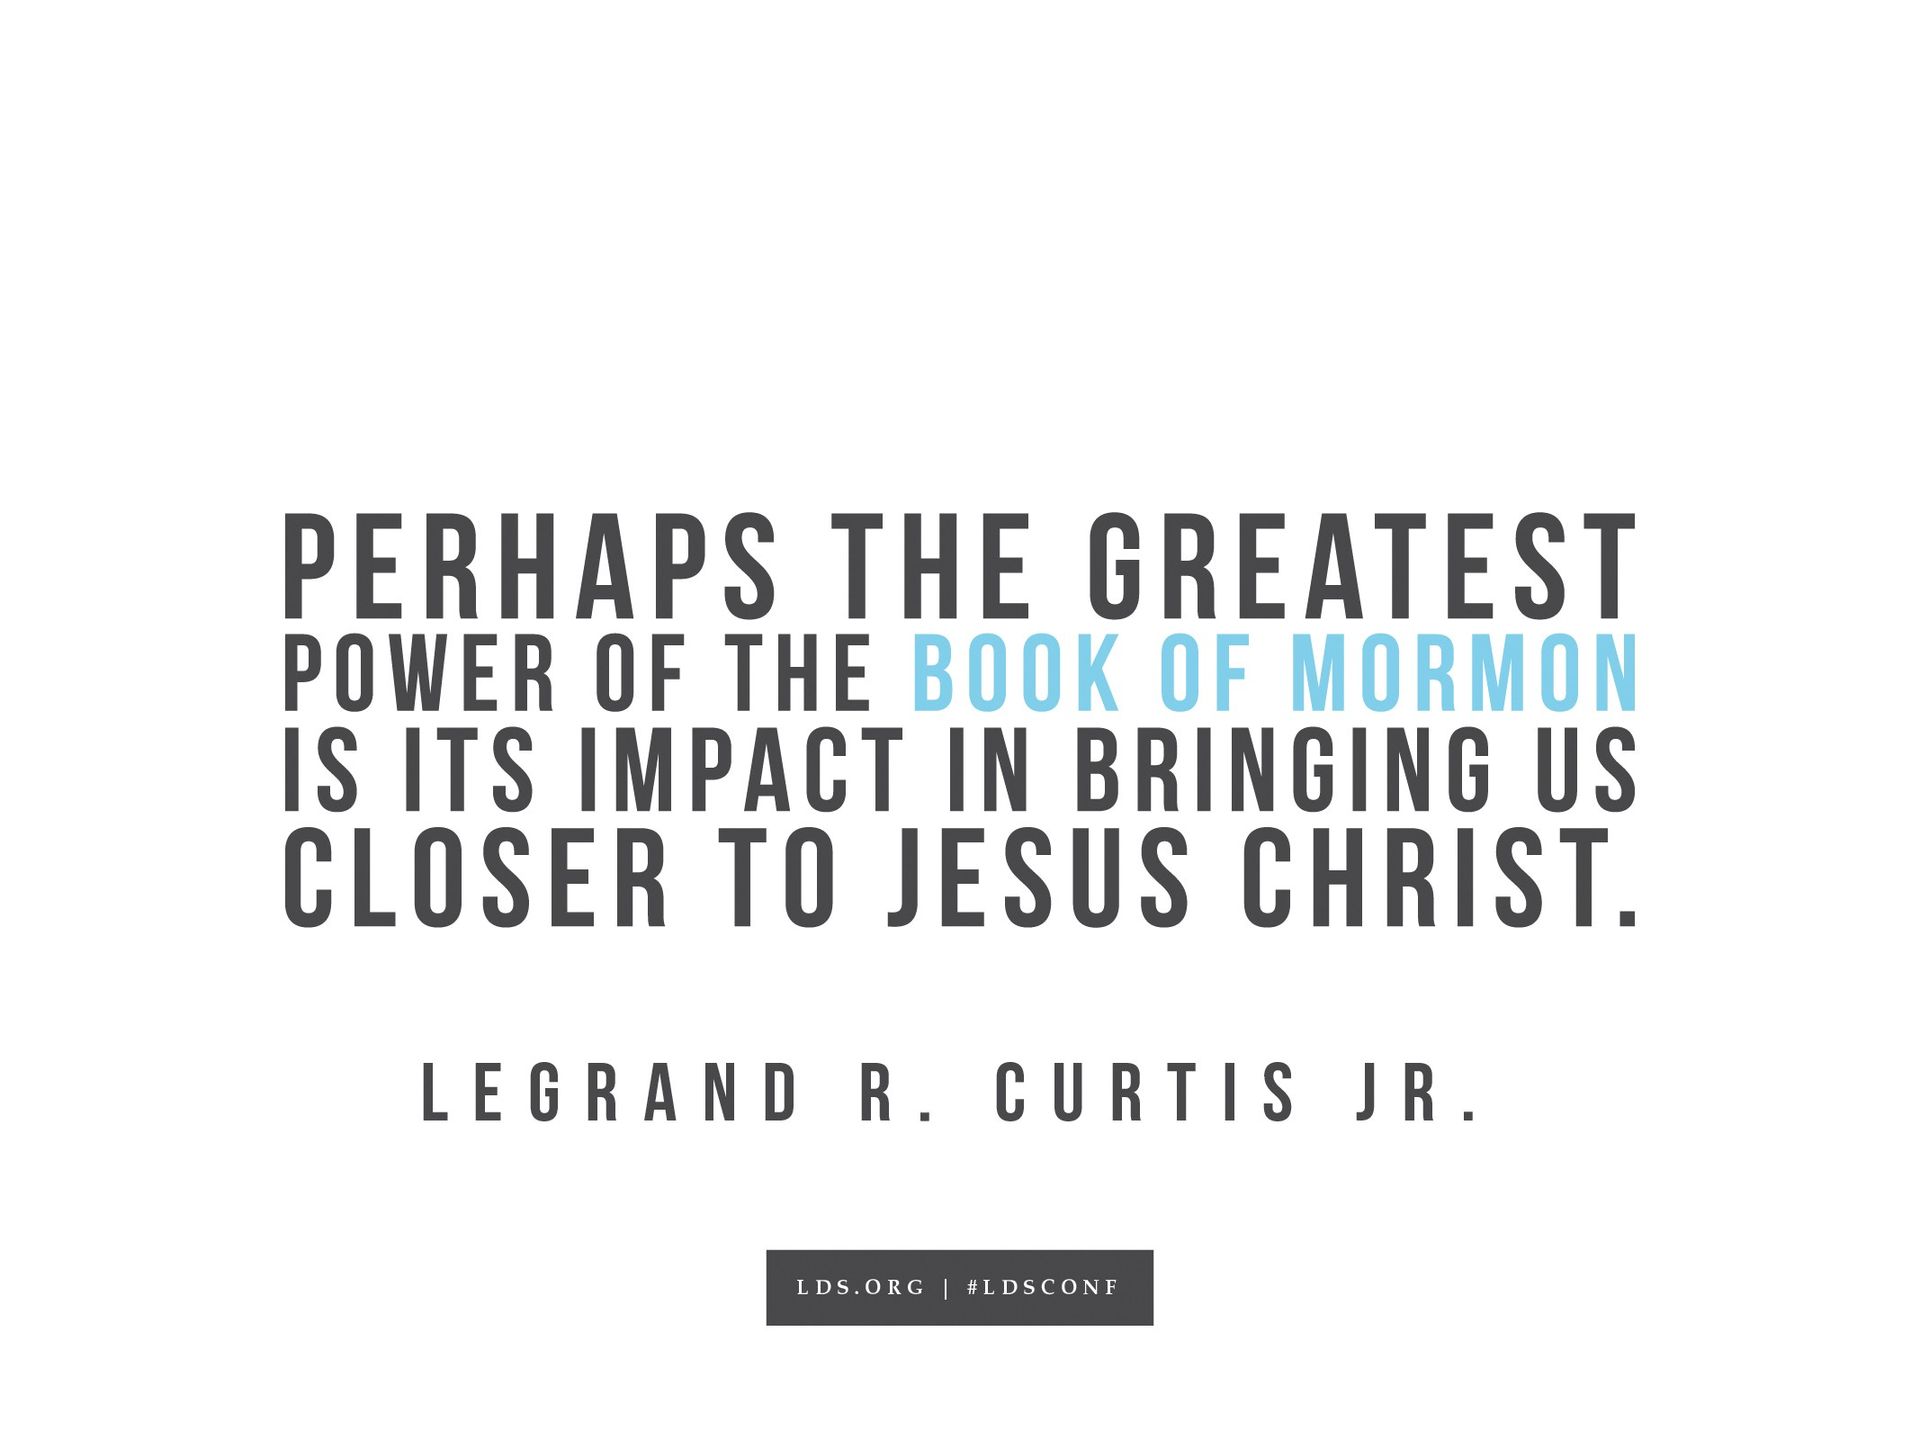 “The greatest power of the Book of Mormon is its impact in bringing us closer to Jesus Christ.”—LeGrand R. Curtis Jr., “There Is Power in the Book”